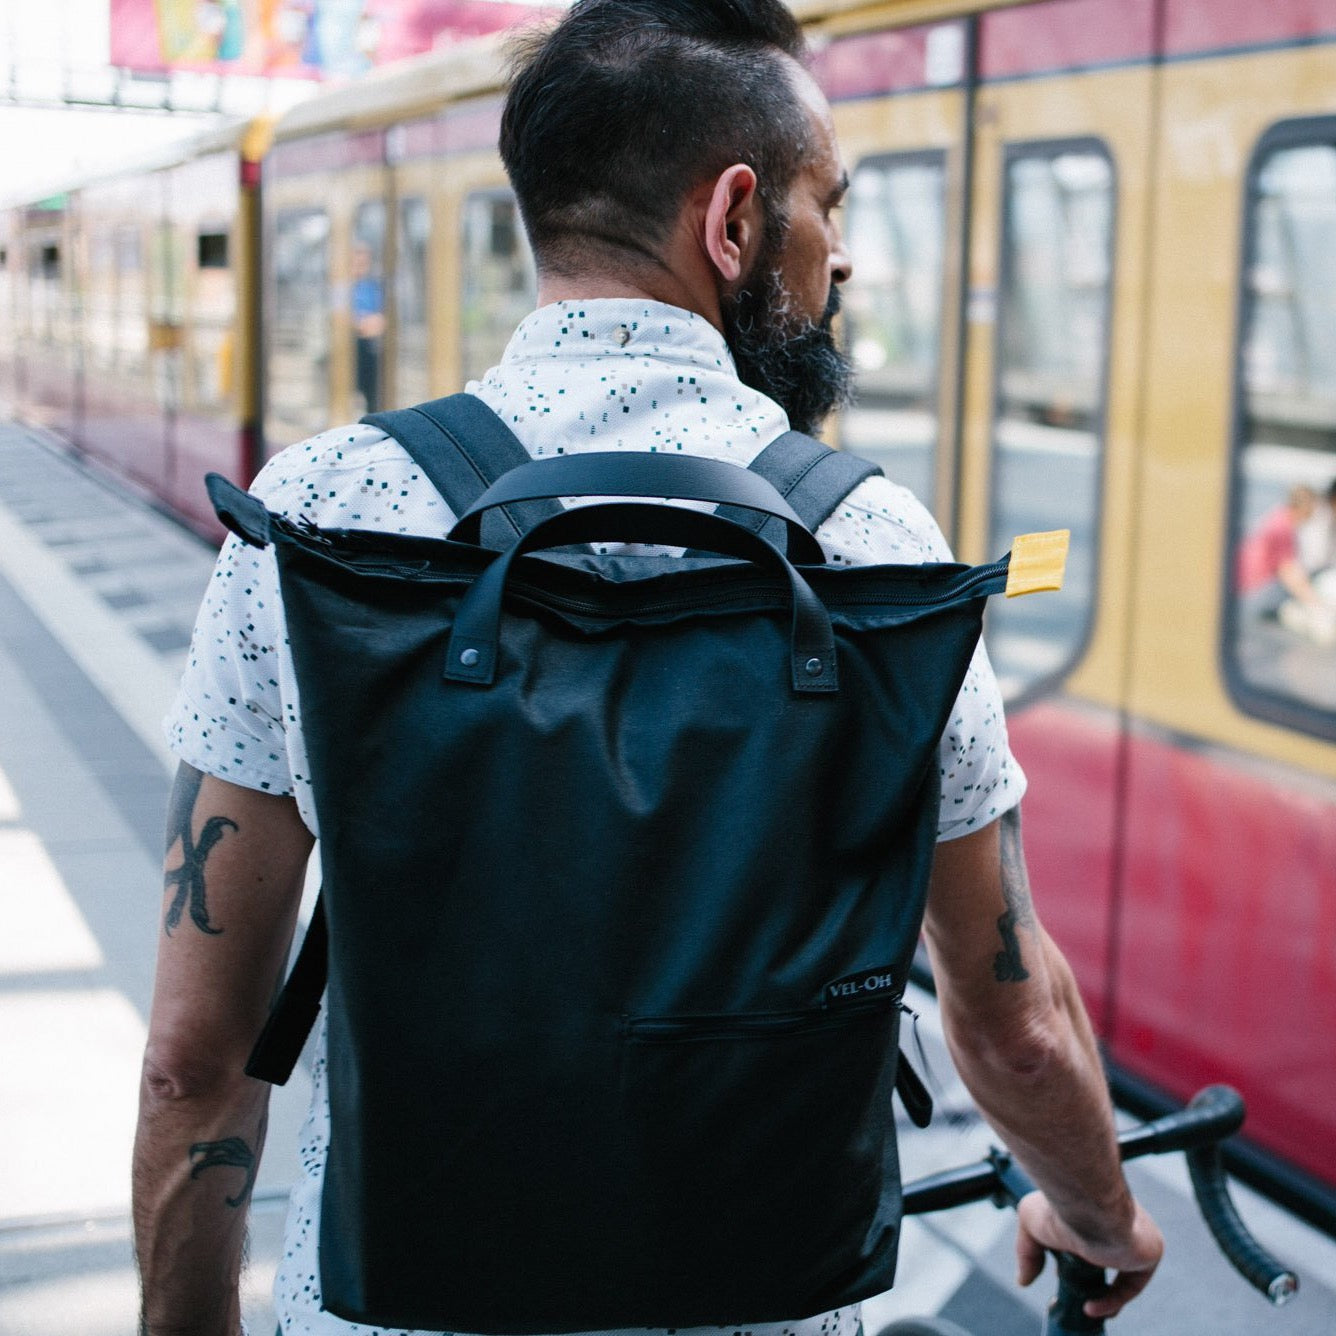 andthen.design an evolution of Vel-Oh.com-Dave | Backpack handmade using waxed cotton and no leather